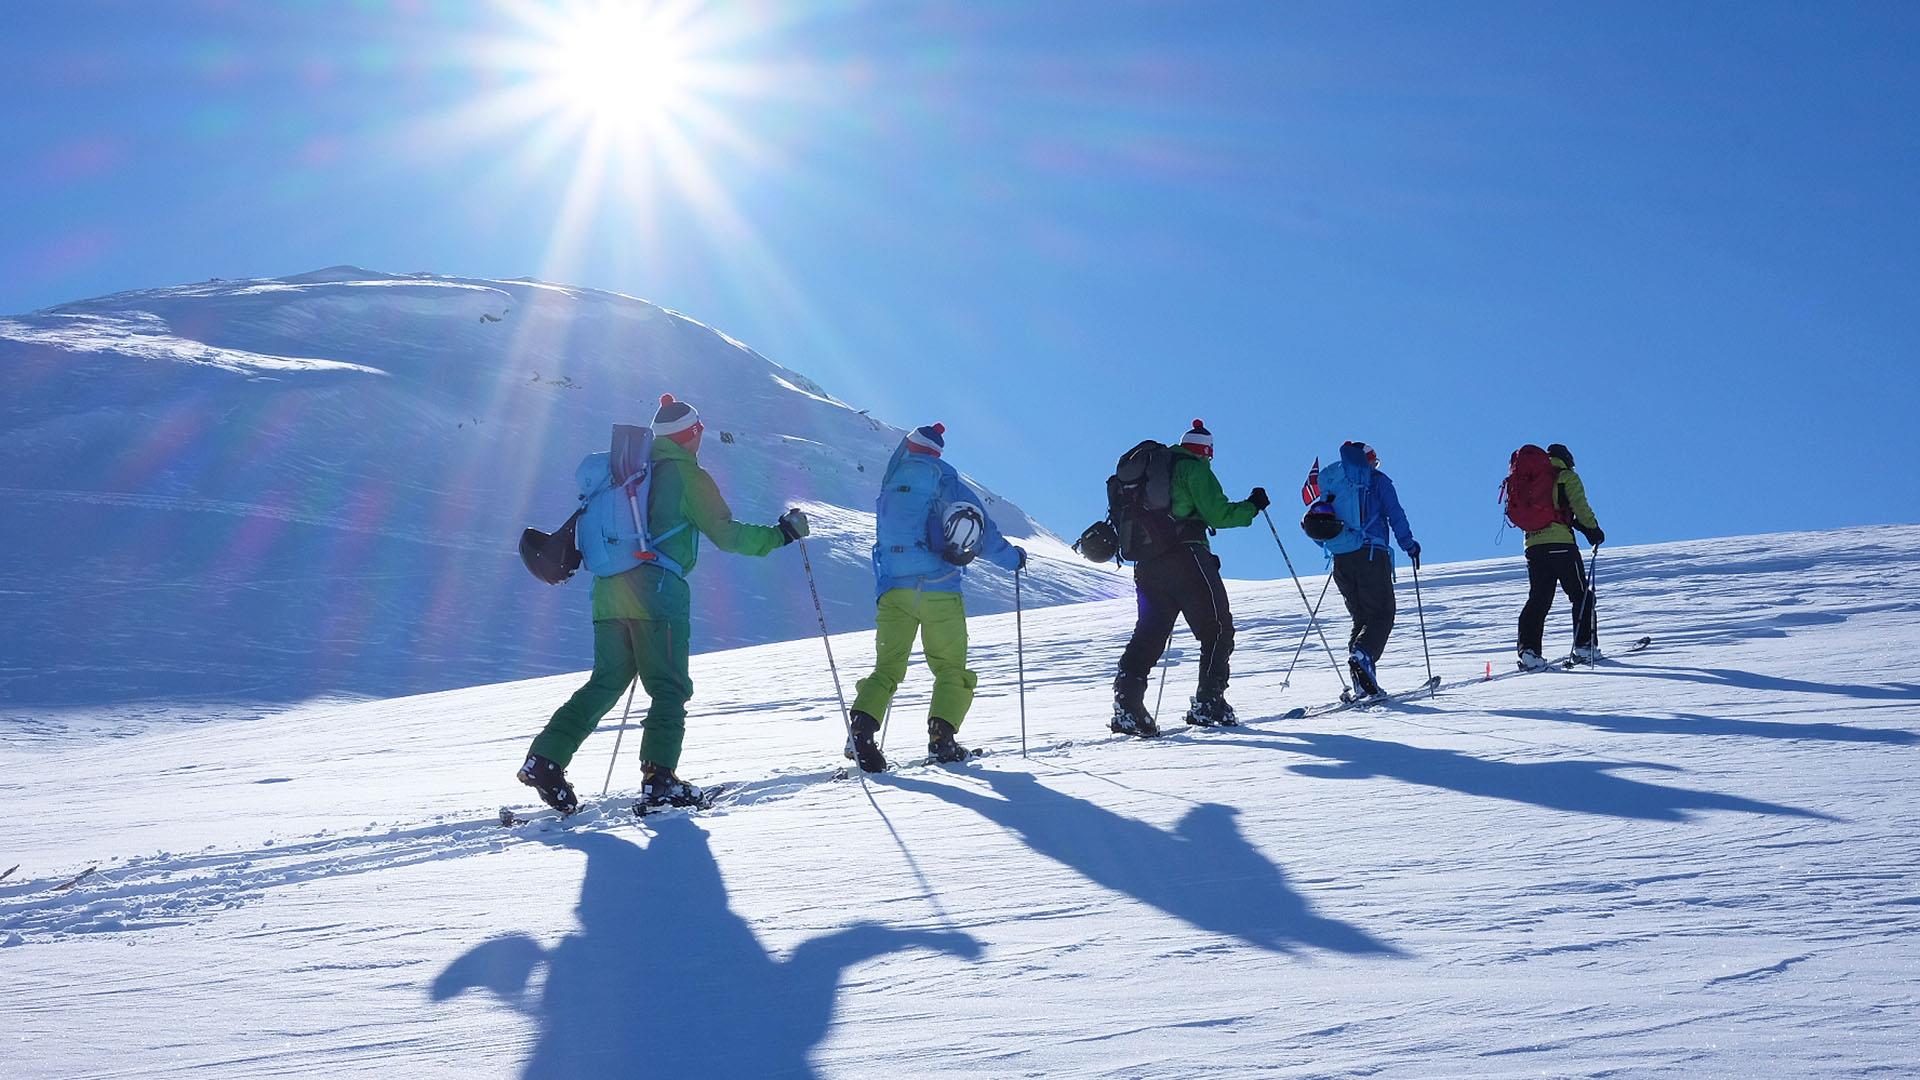 Five mountain skiers on their way up a hillside while the sun is shining from a blue sky.